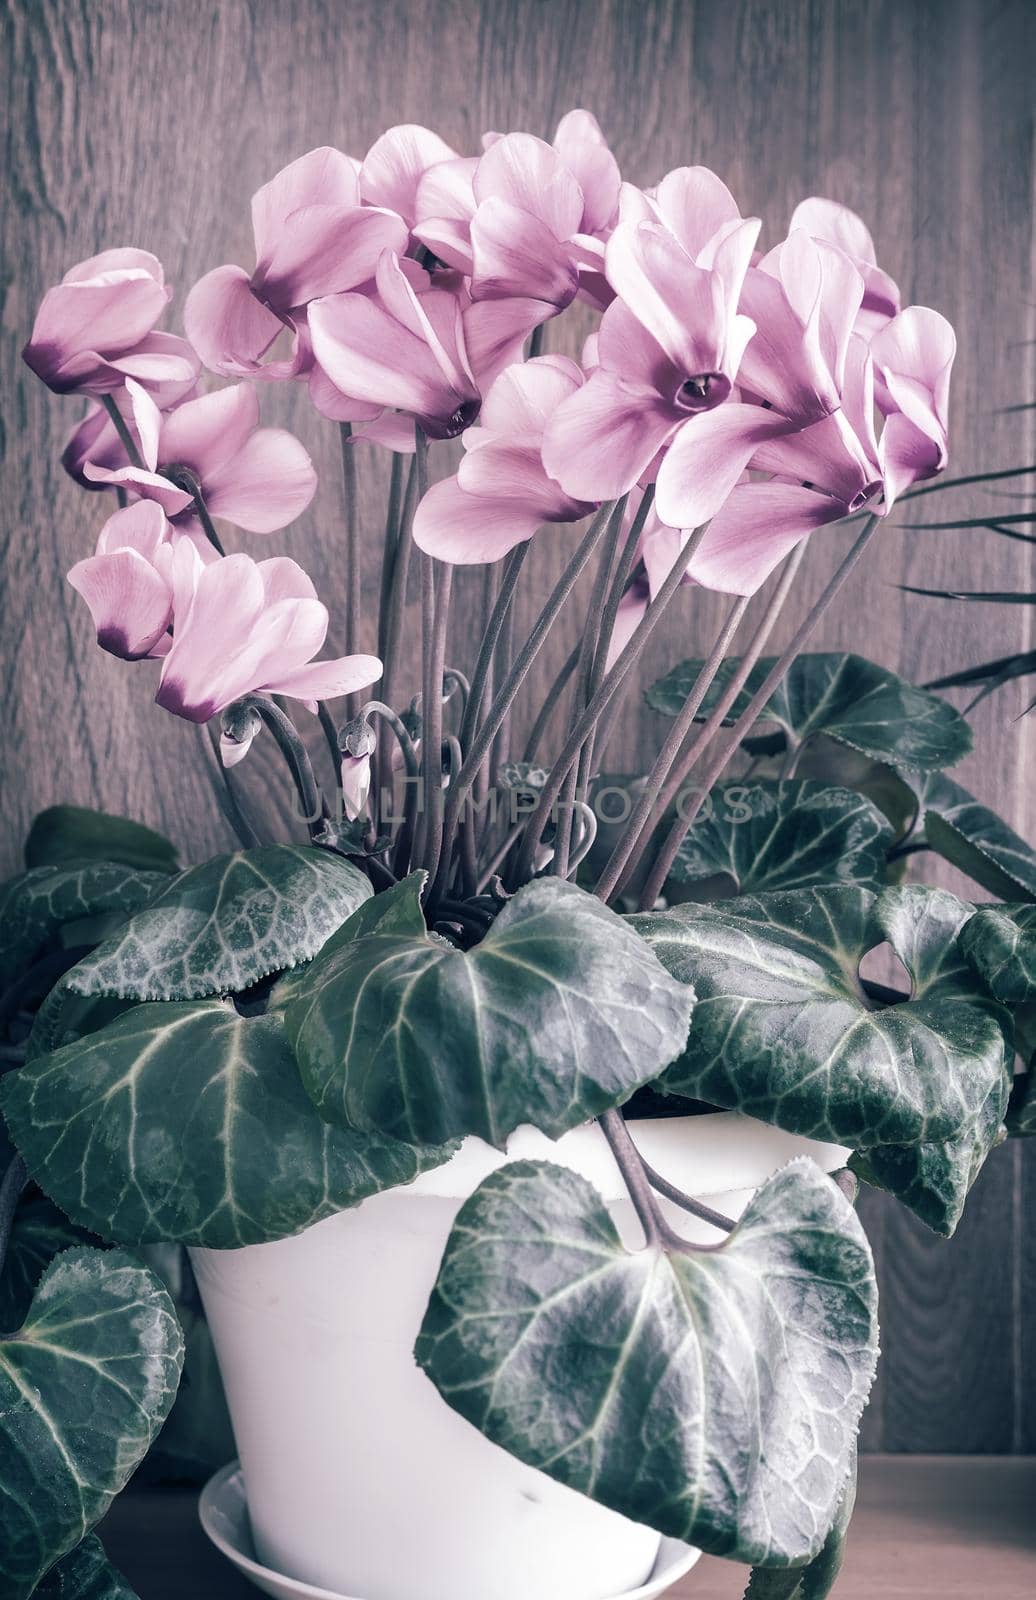 On light green background, bright pink flowers of cyclamen surrounded by green leaves.